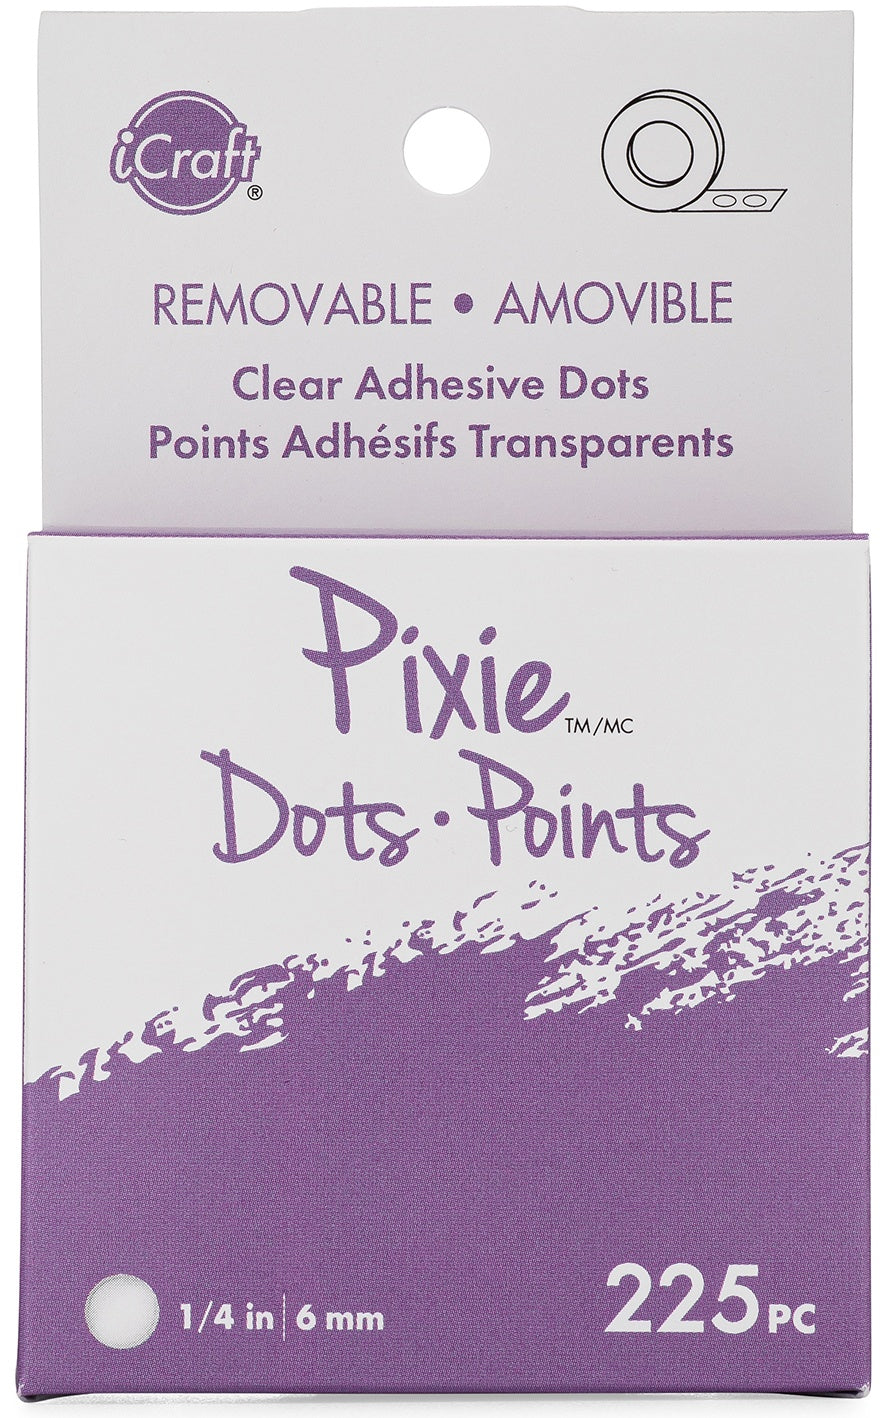 Pixie Dots Adhesive Dots - Removable